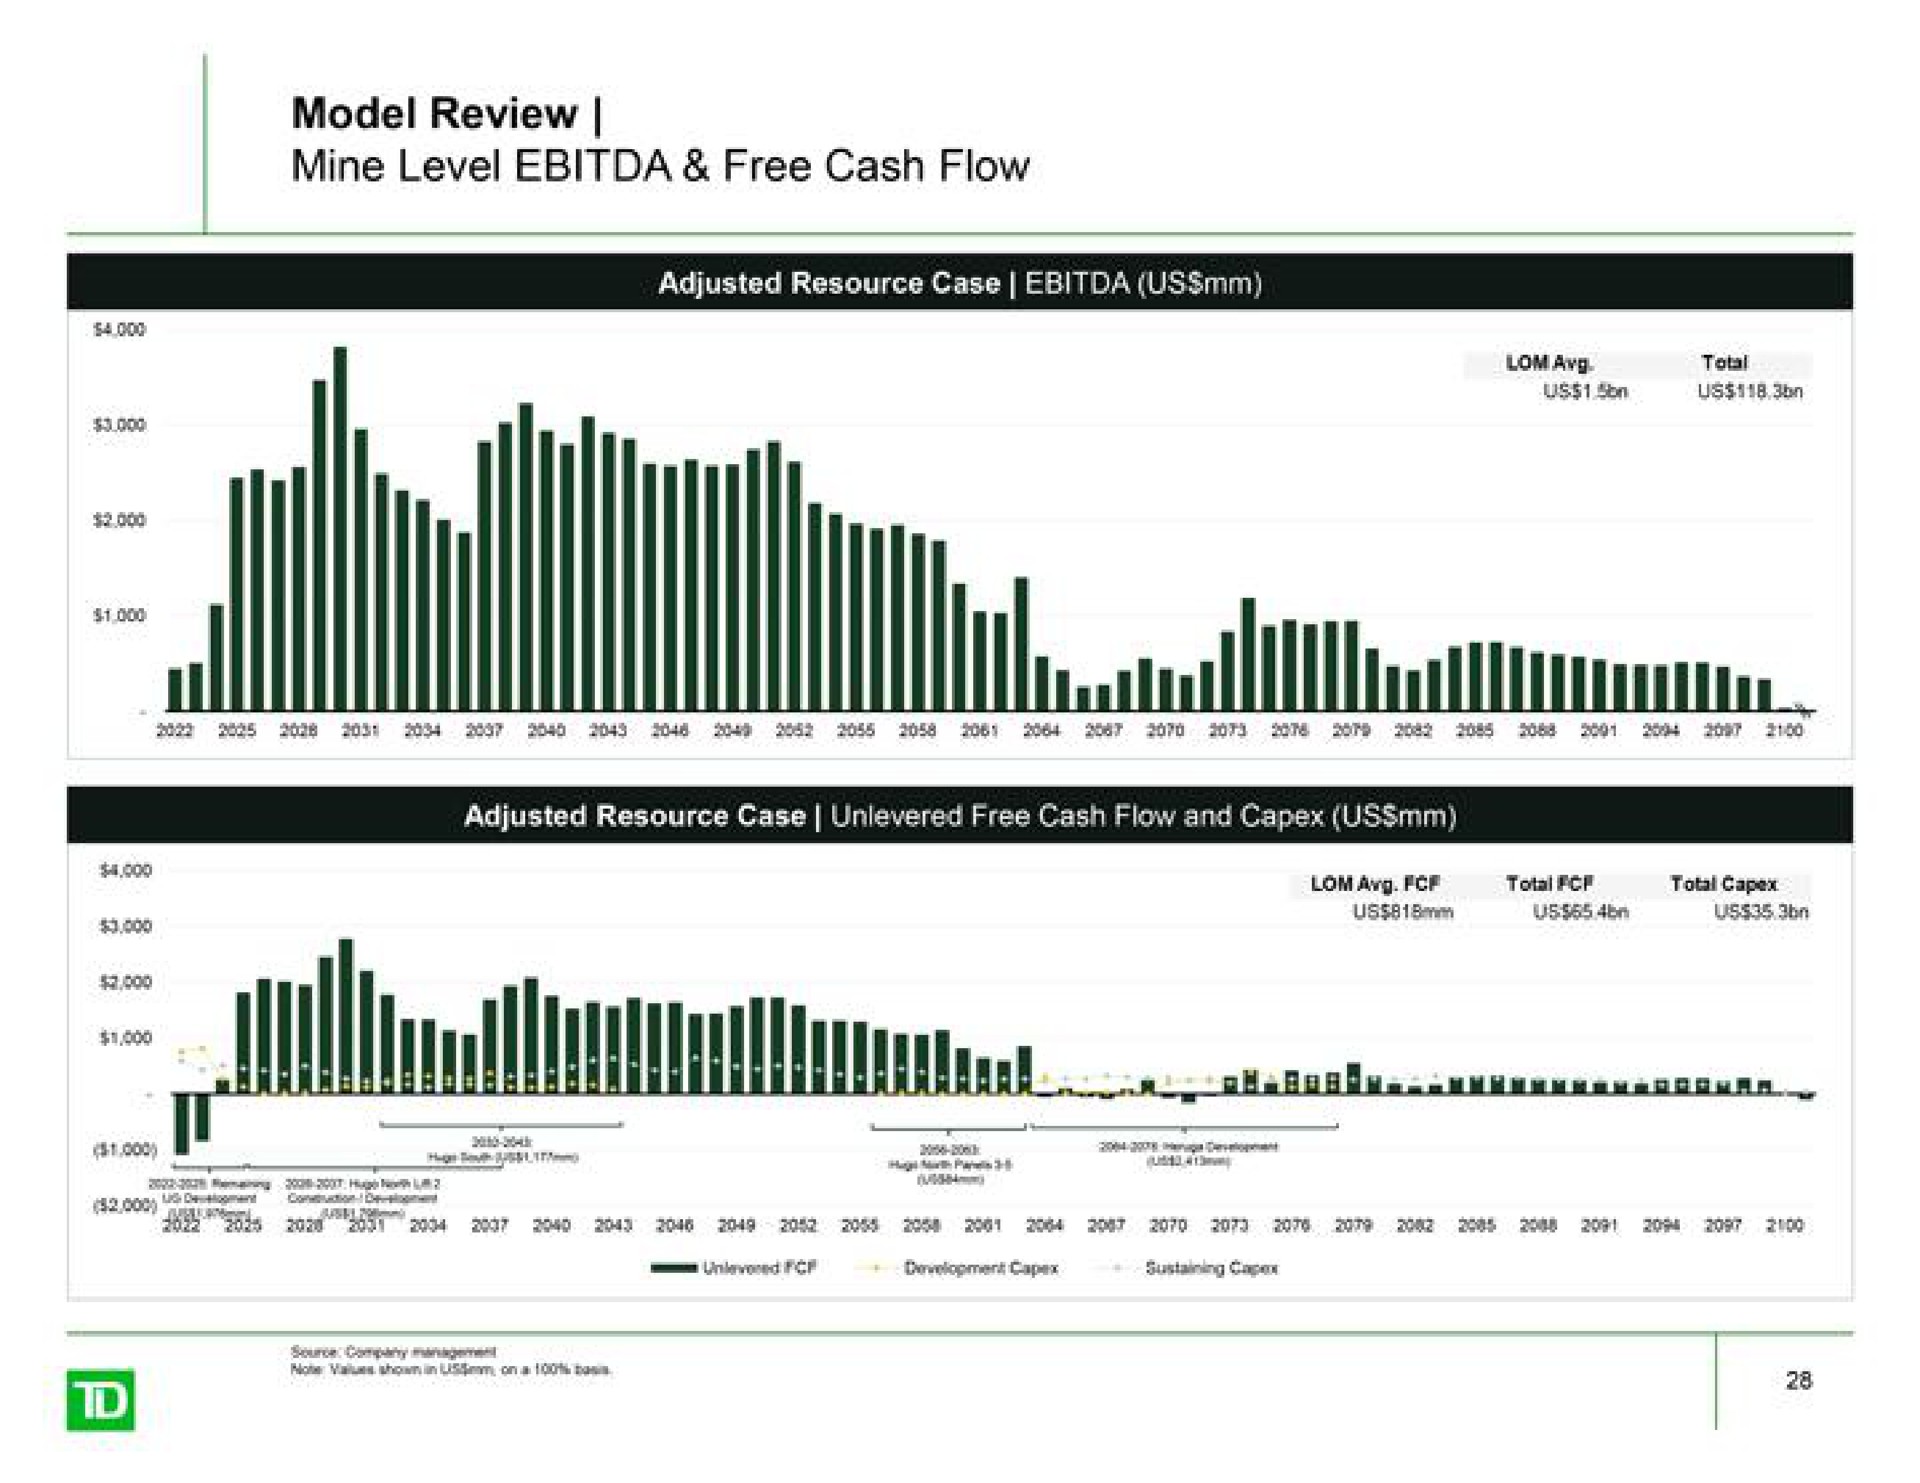 model review mine level free cash flow be | TD Securities